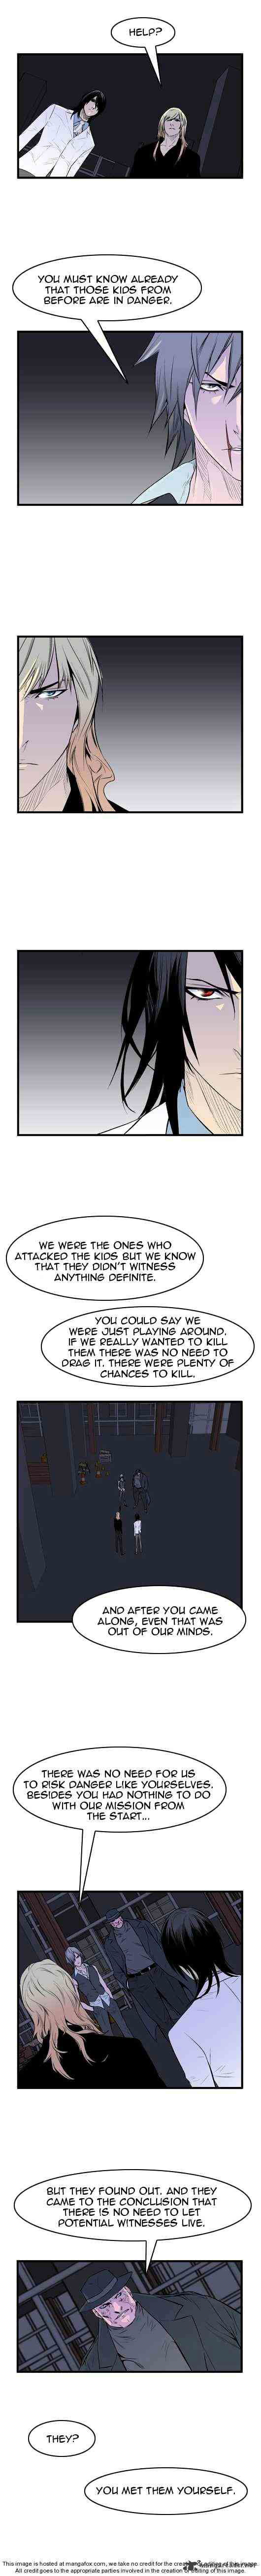 Noblesse Chapter 46 _ Chapters 46-60 page 54